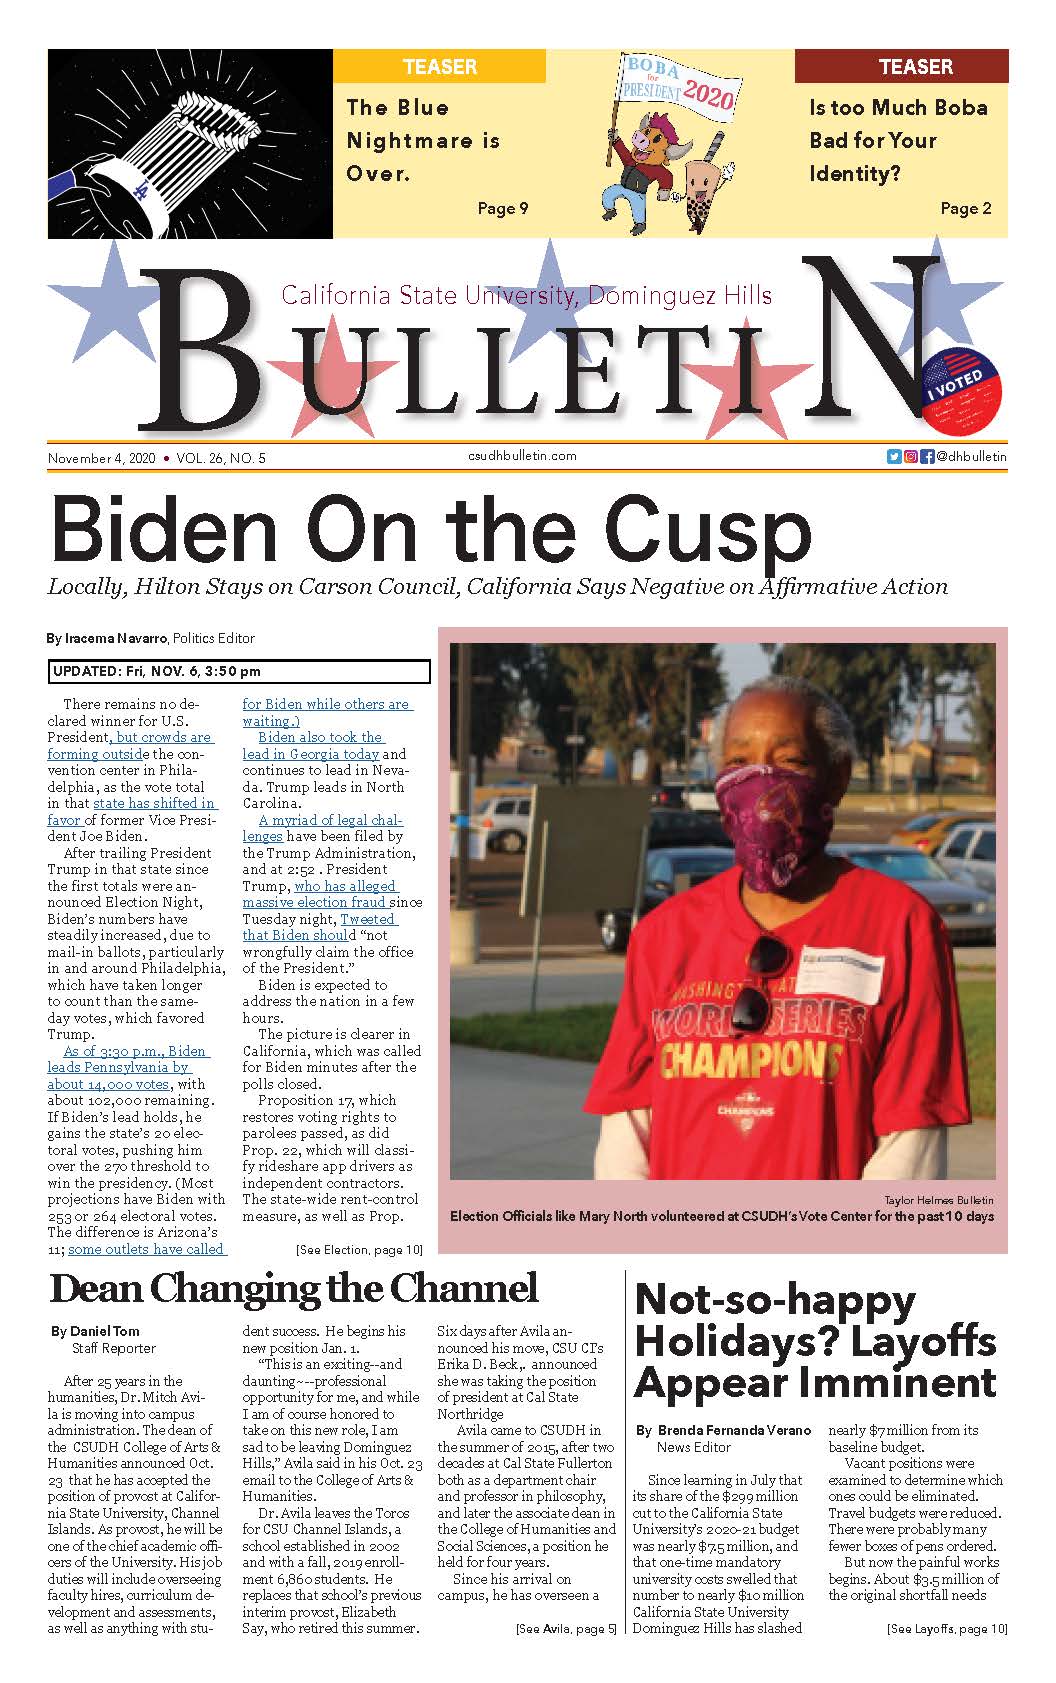 Issue 5 of Bulletin Live! Collector’s Item! Worth its Weight in Digital Paper!